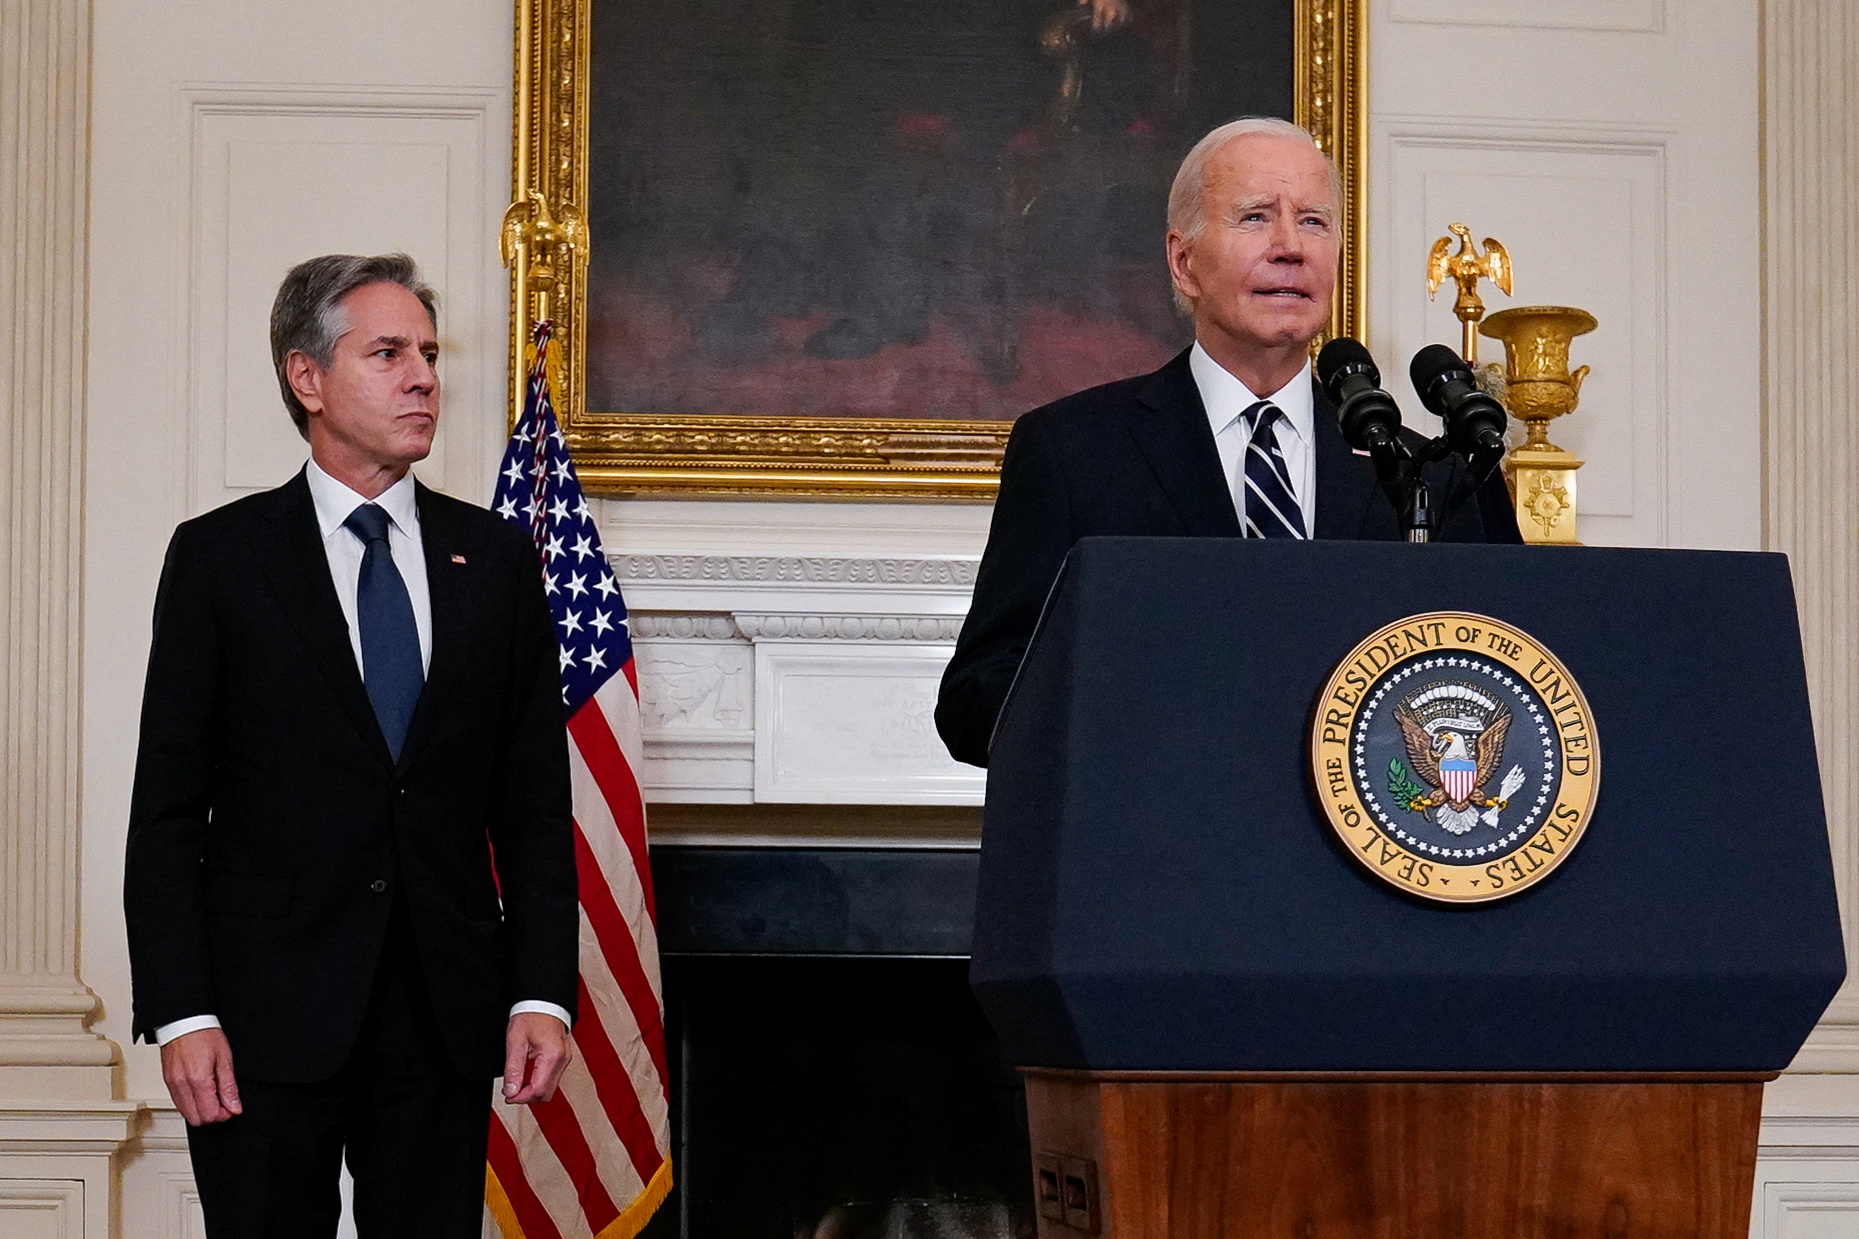 U.S. President Joe Biden, flanked by U.S. Secretary of State Antony Blinken, speaks about the conflict in Israel, after Hamas launched its biggest attack in decades, while making a statement about the crisis, at the White House in Washington, U.S. October 7, 2023. REUTERS/Elizabeth Frantz